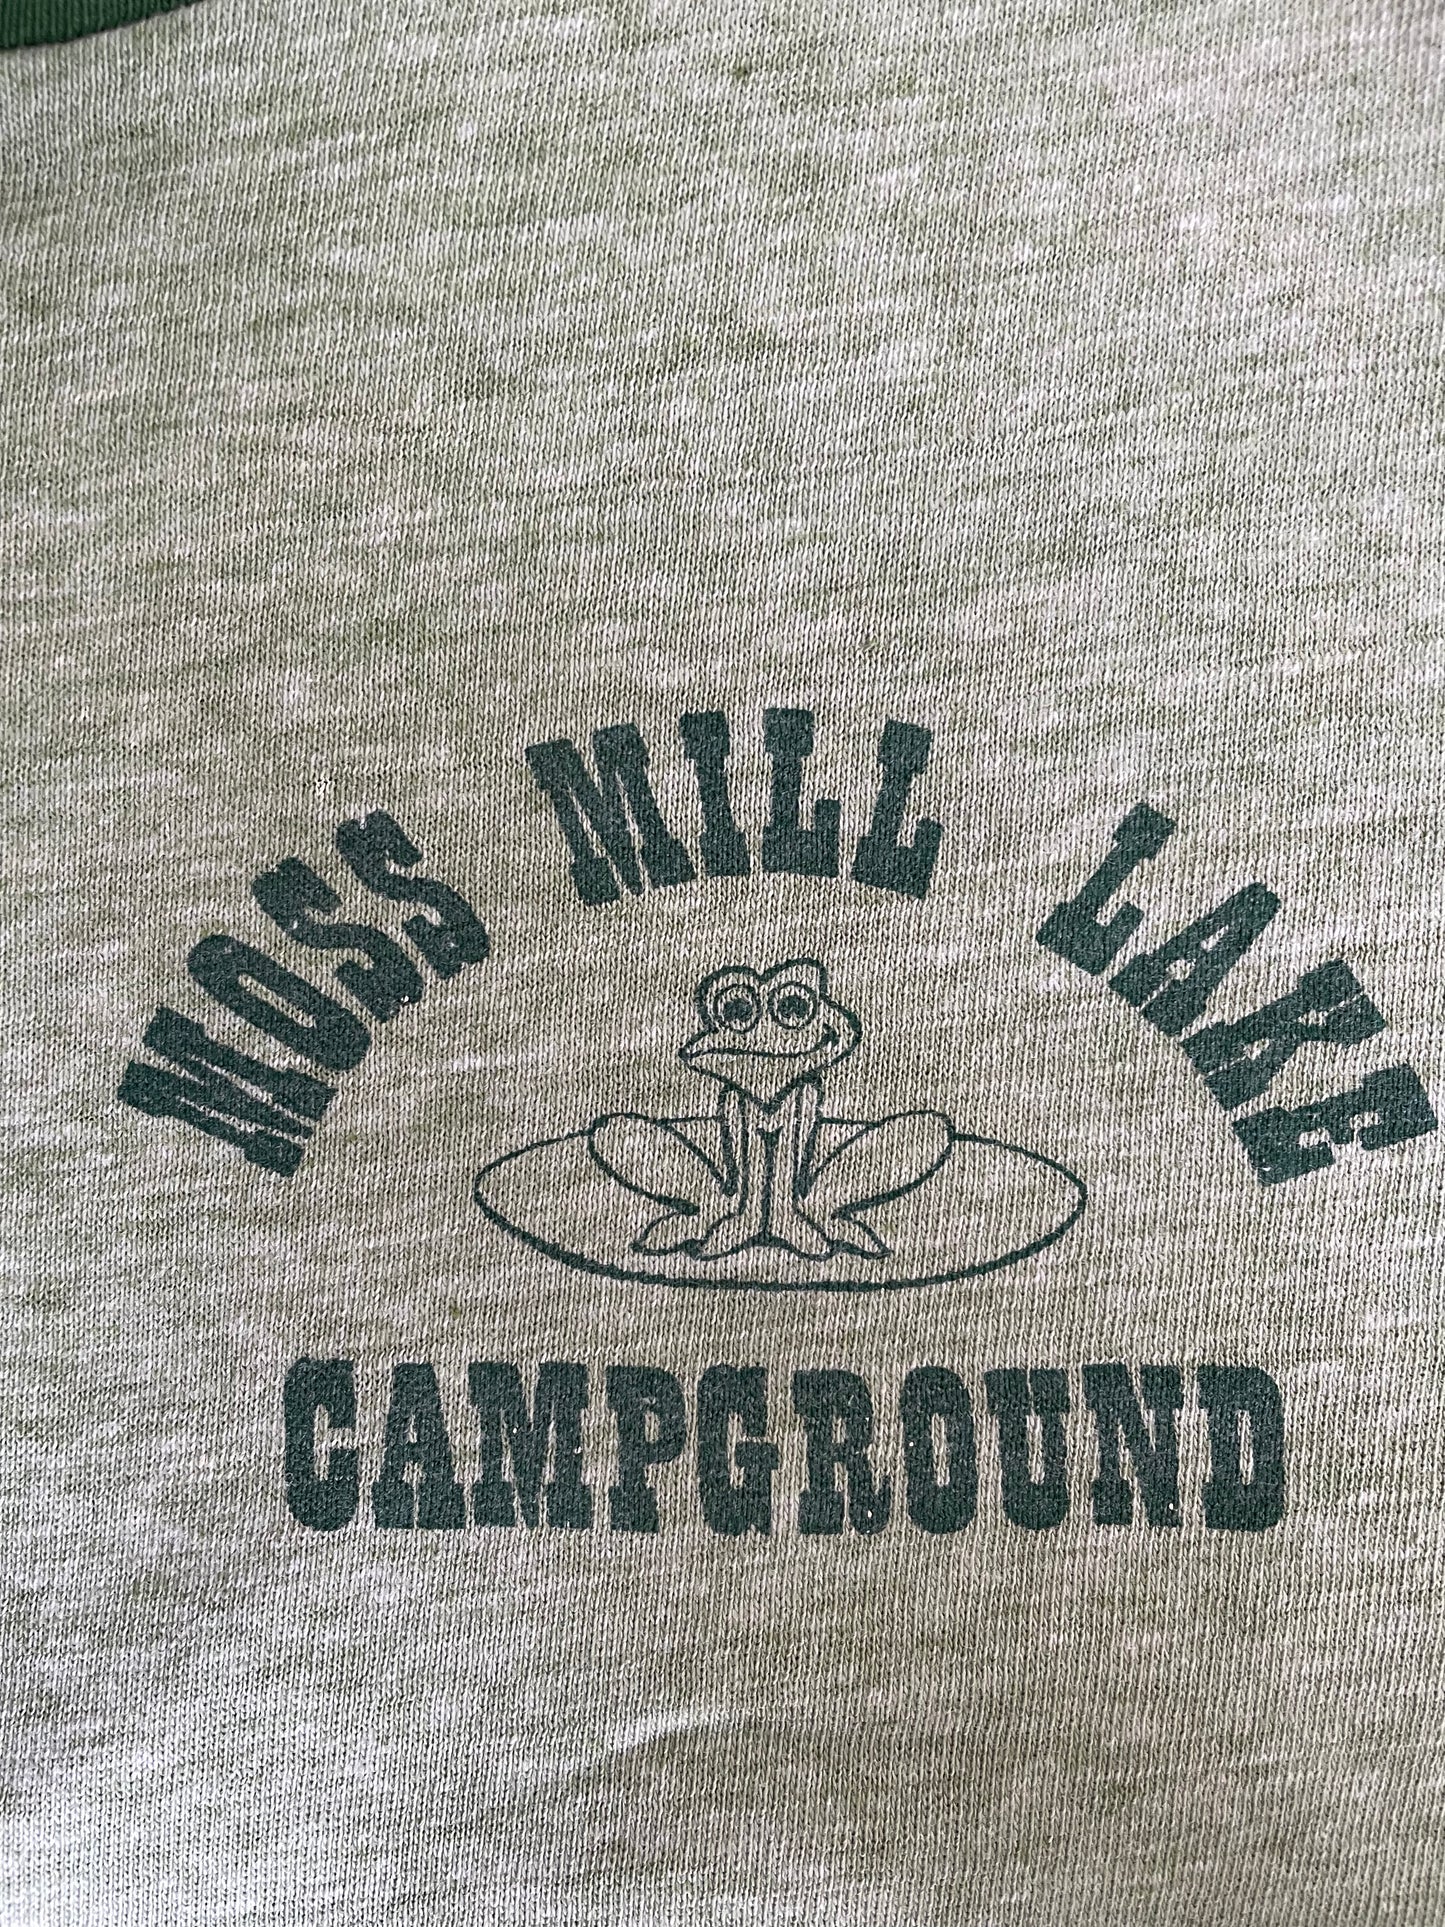 70s Moss Mill Lake Campground Tee